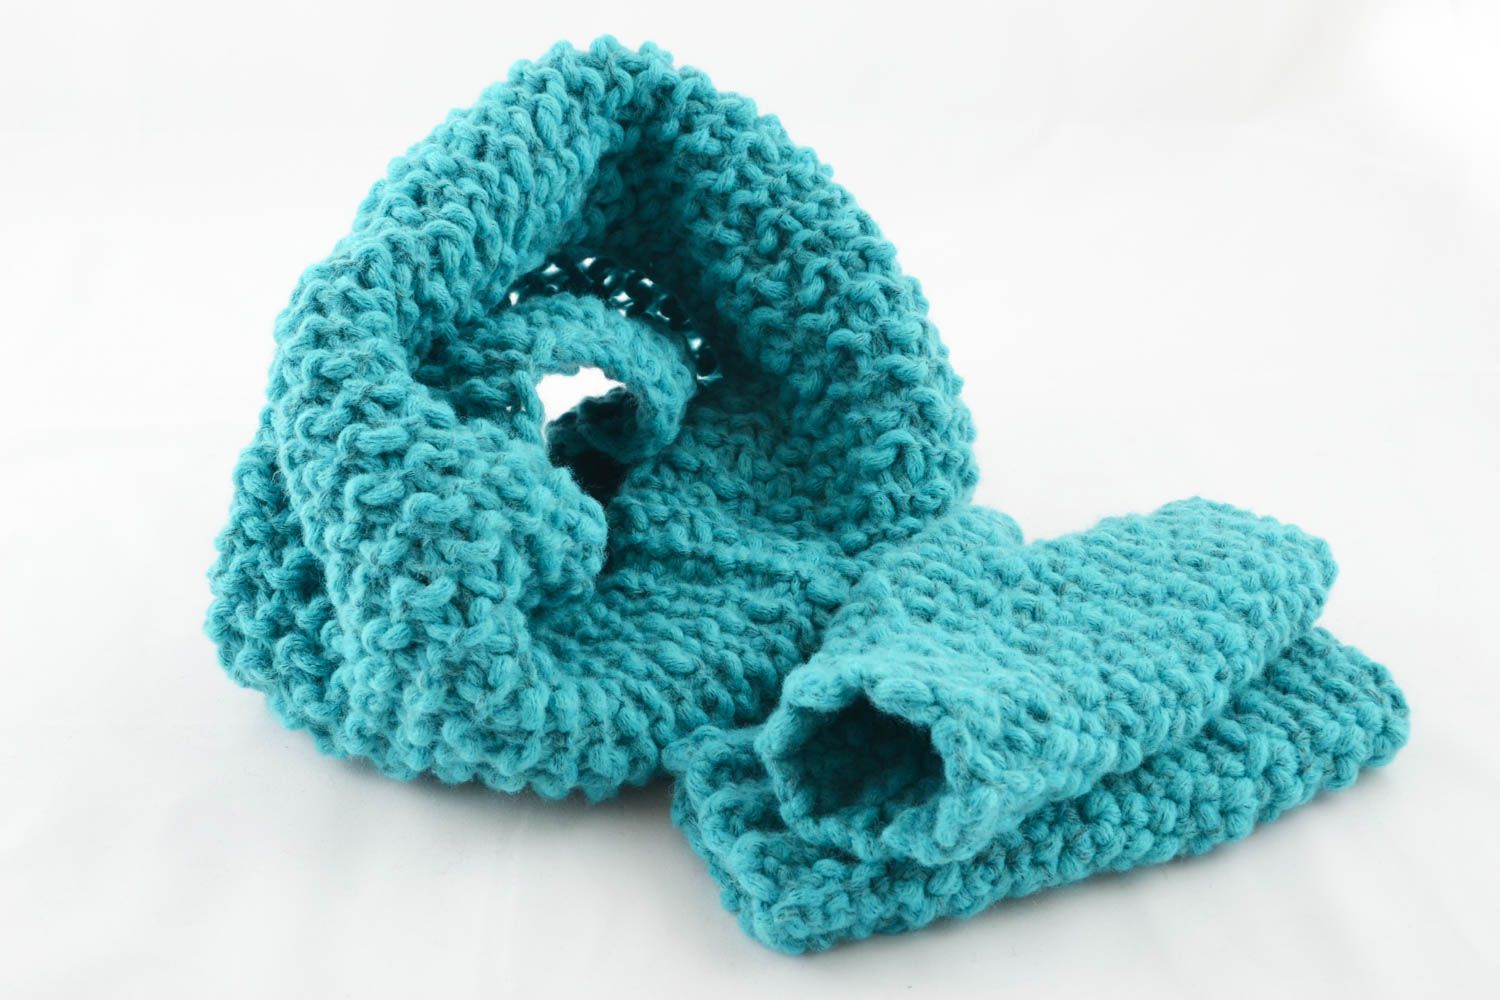 Crochet scarf and mittens photo 4